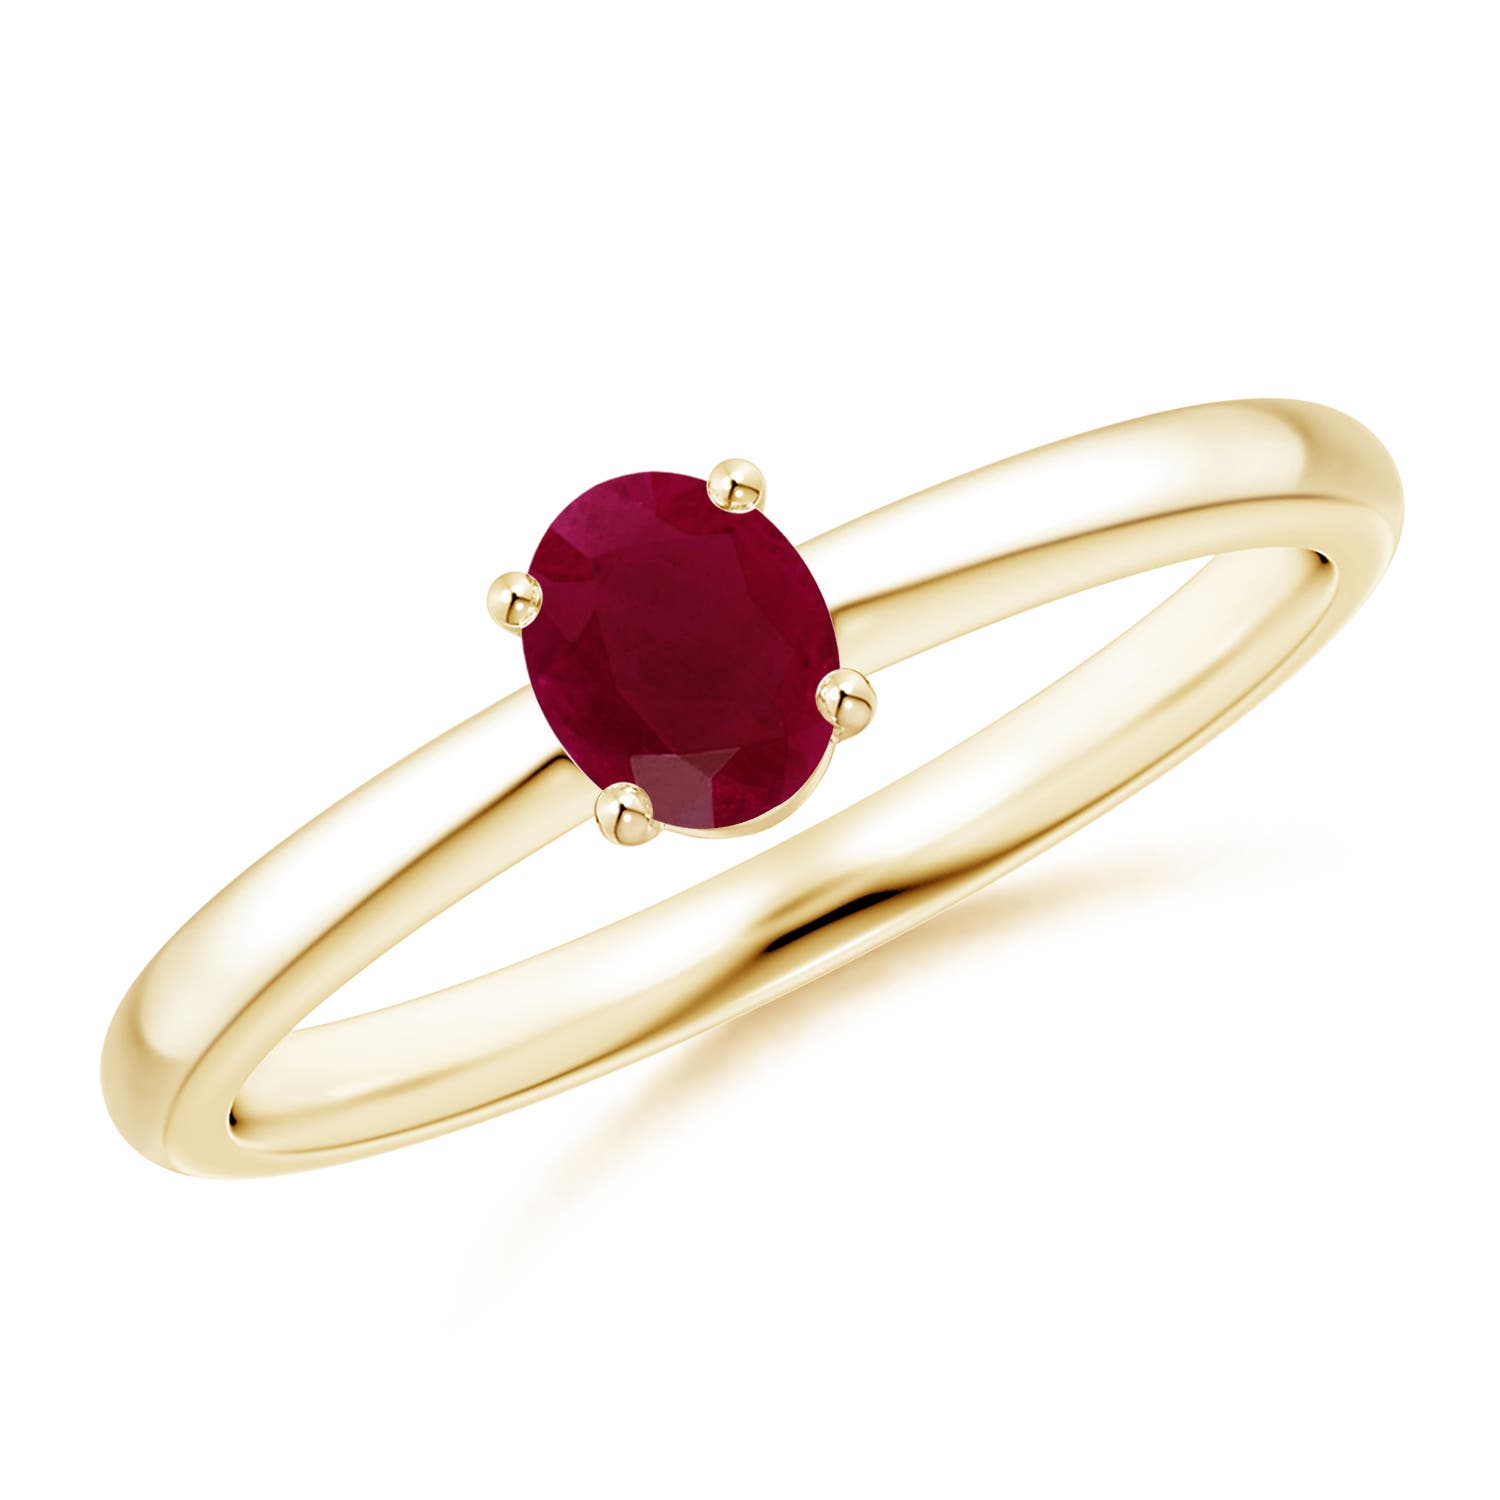 A - Ruby / 0.4 CT / 14 KT Yellow Gold